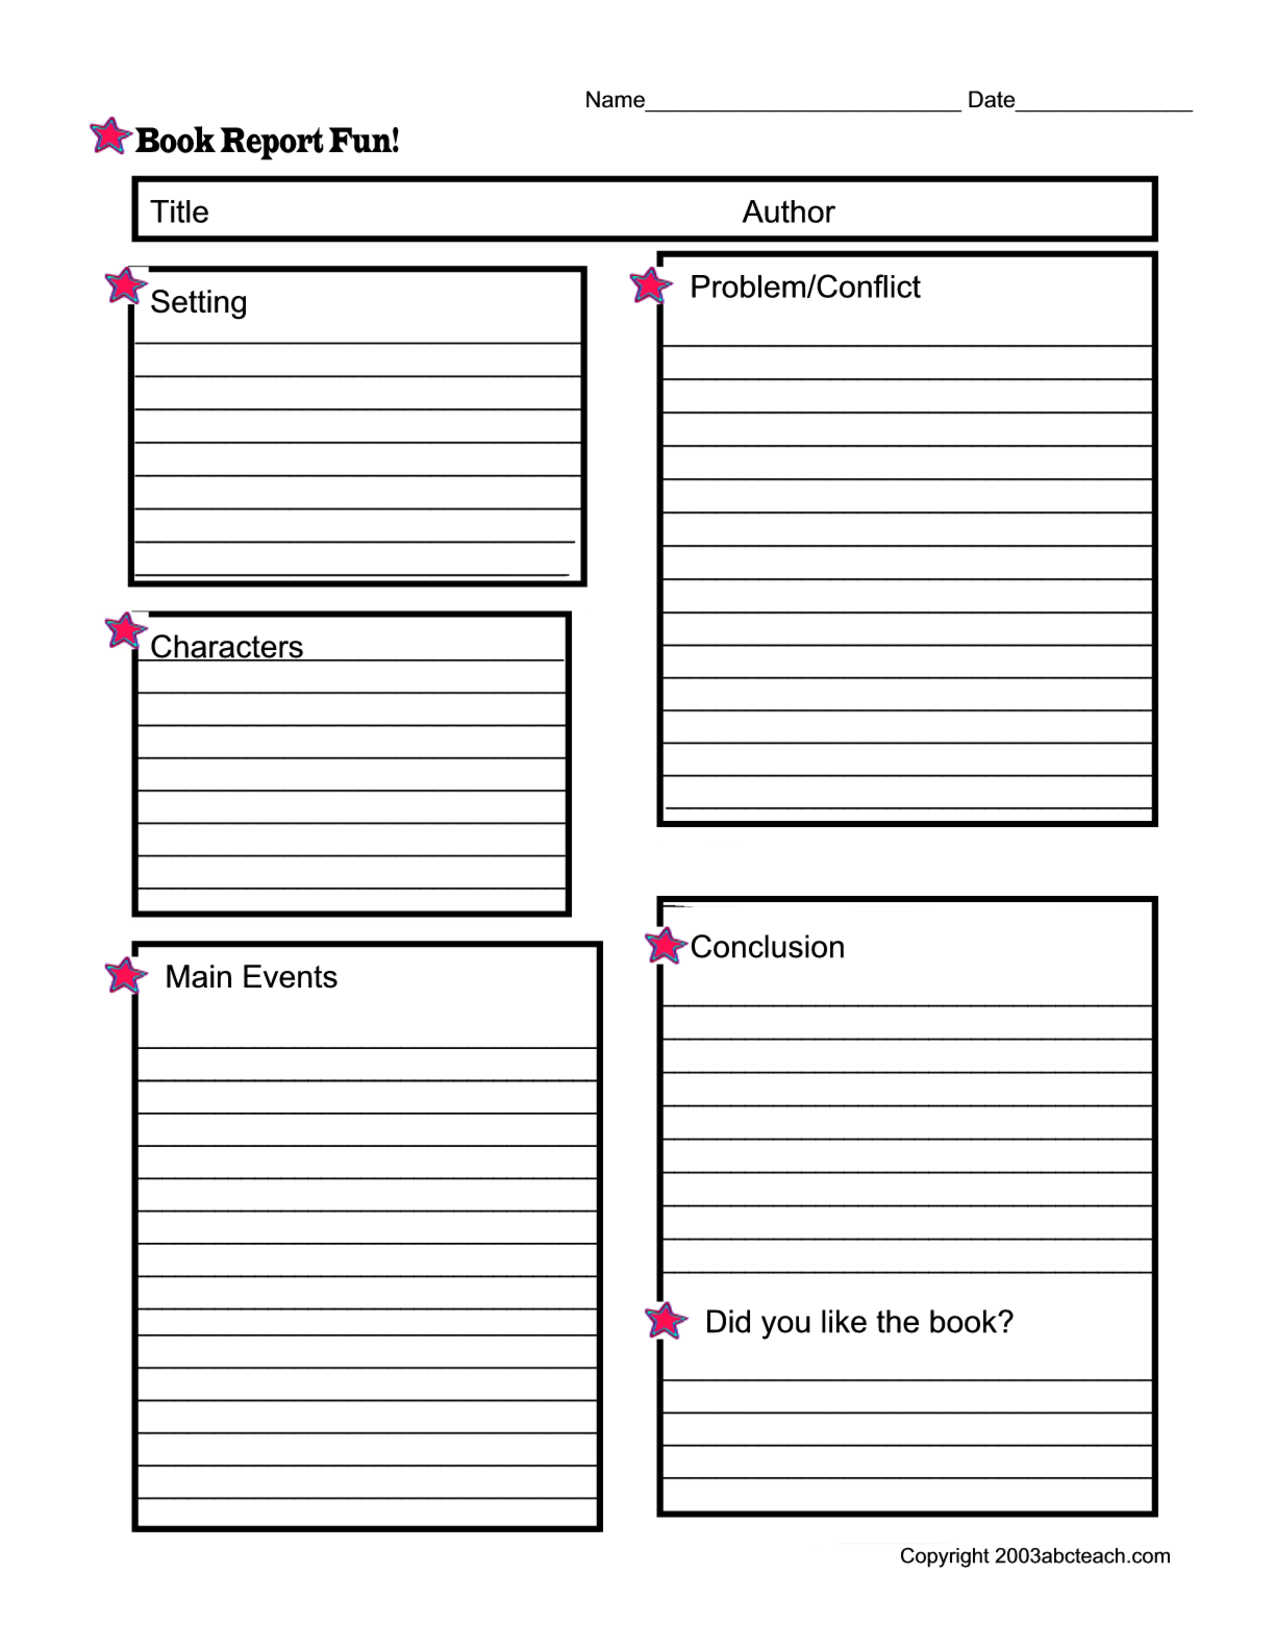 free-printable-book-report-forms-printable-forms-free-online